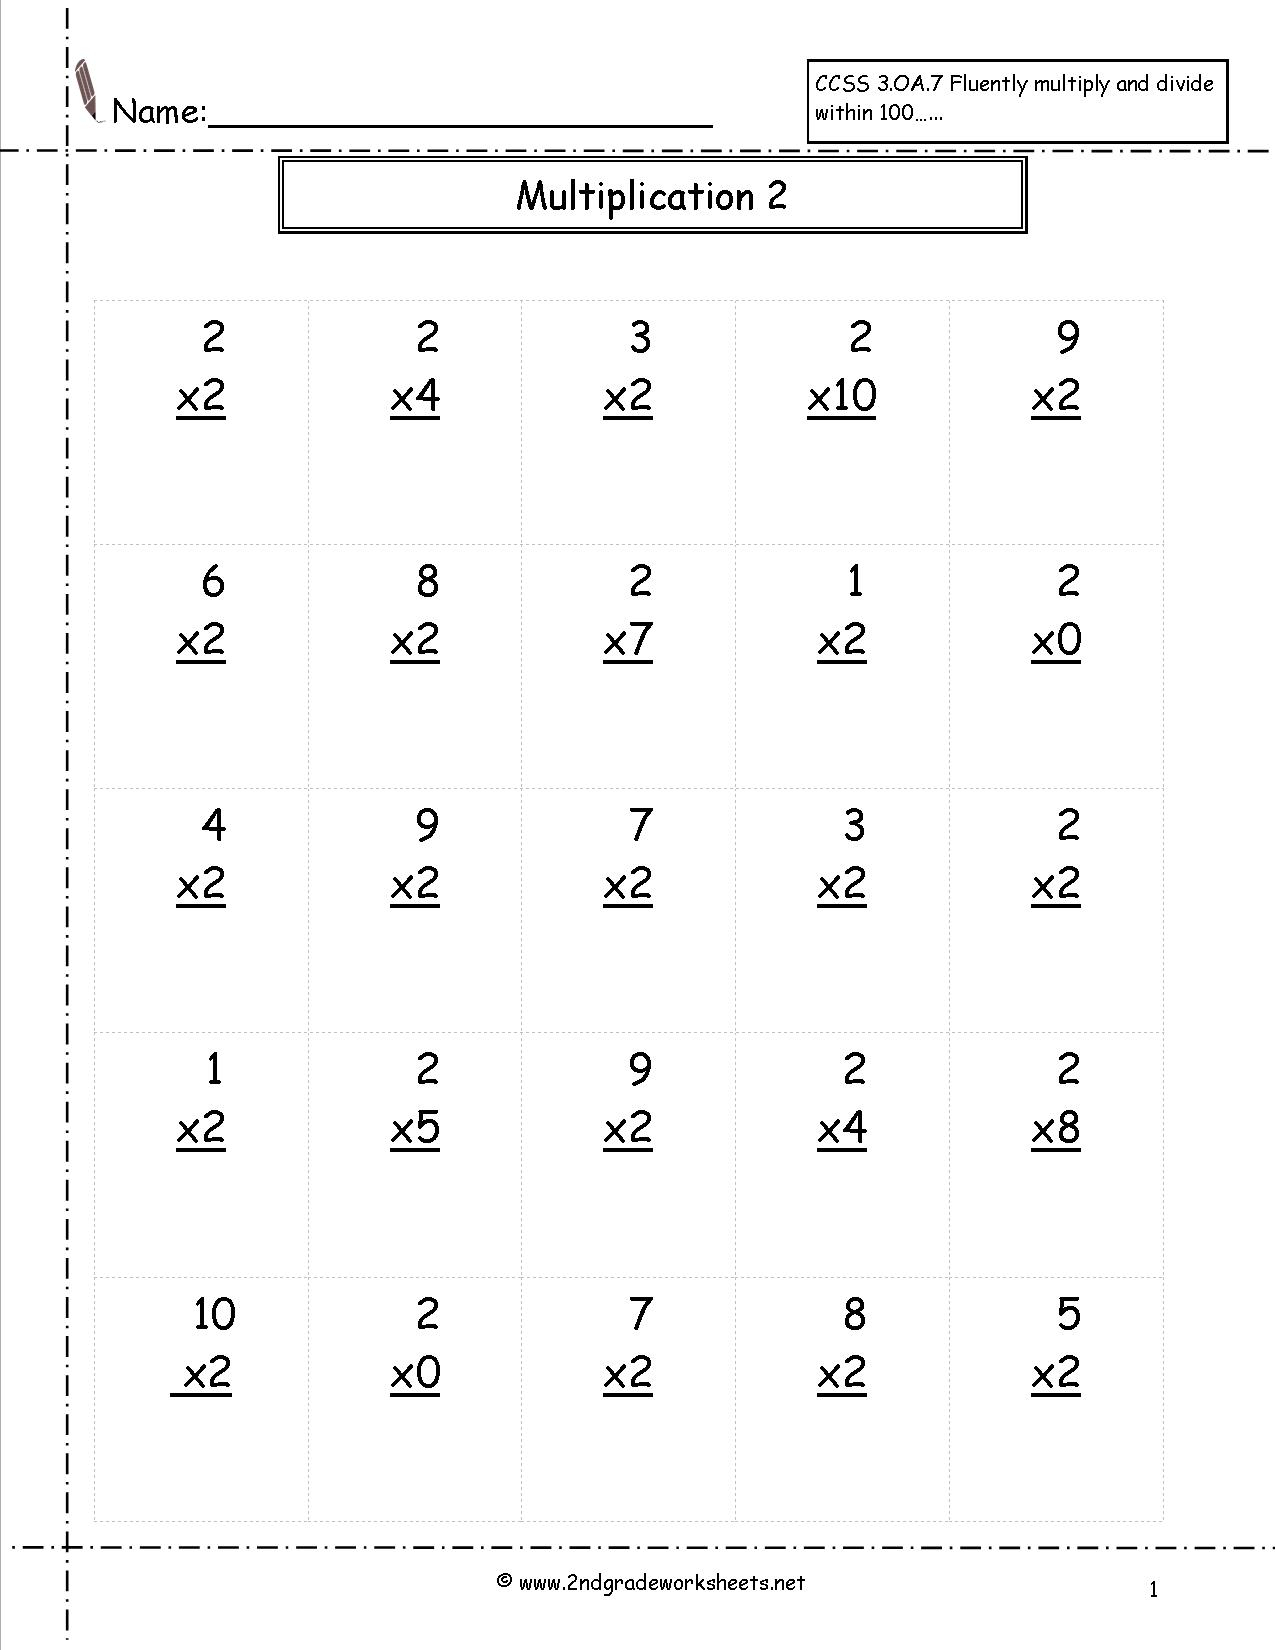 Multiplication Worksheets And Printouts regarding Multiplication Worksheets Zero And Ones